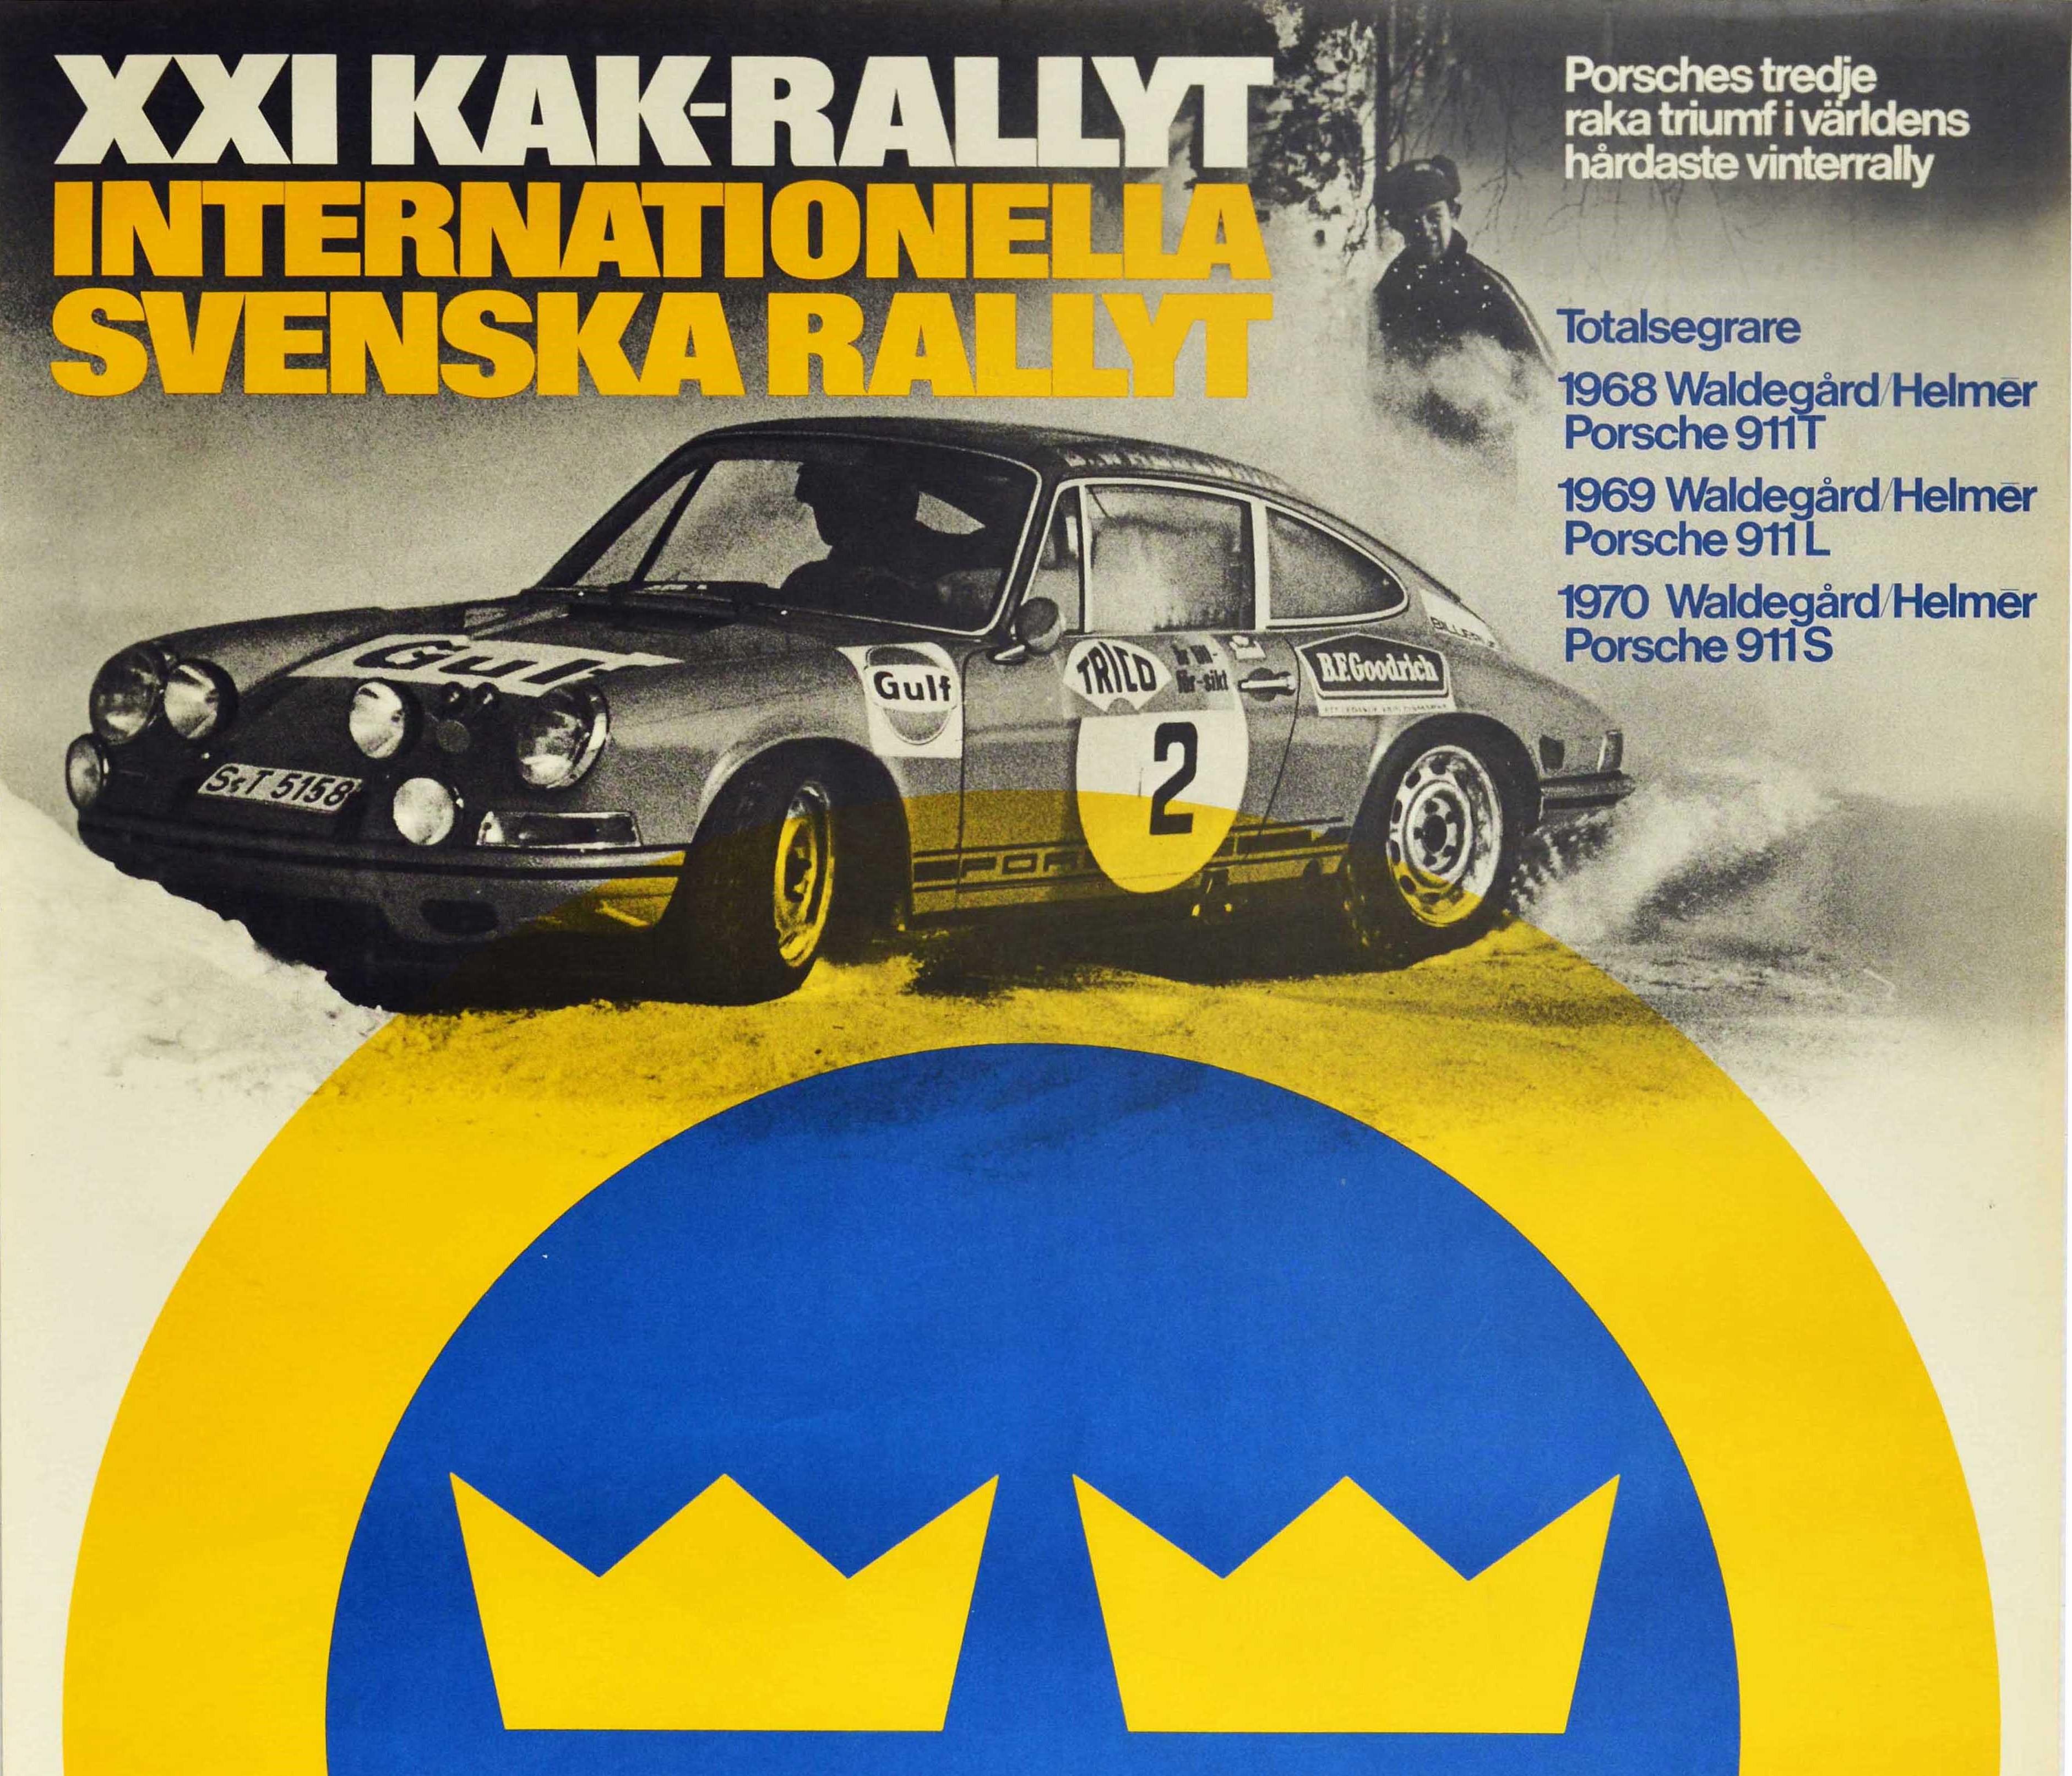 Original vintage motorsport poster for Porsche KAK-Rallyt Internationella Svenska Rallyt / International Swedish Rally featuring a black and white photograph of a Porsche 911 car skidding around a corner at speed with a bold yellow and blue crown